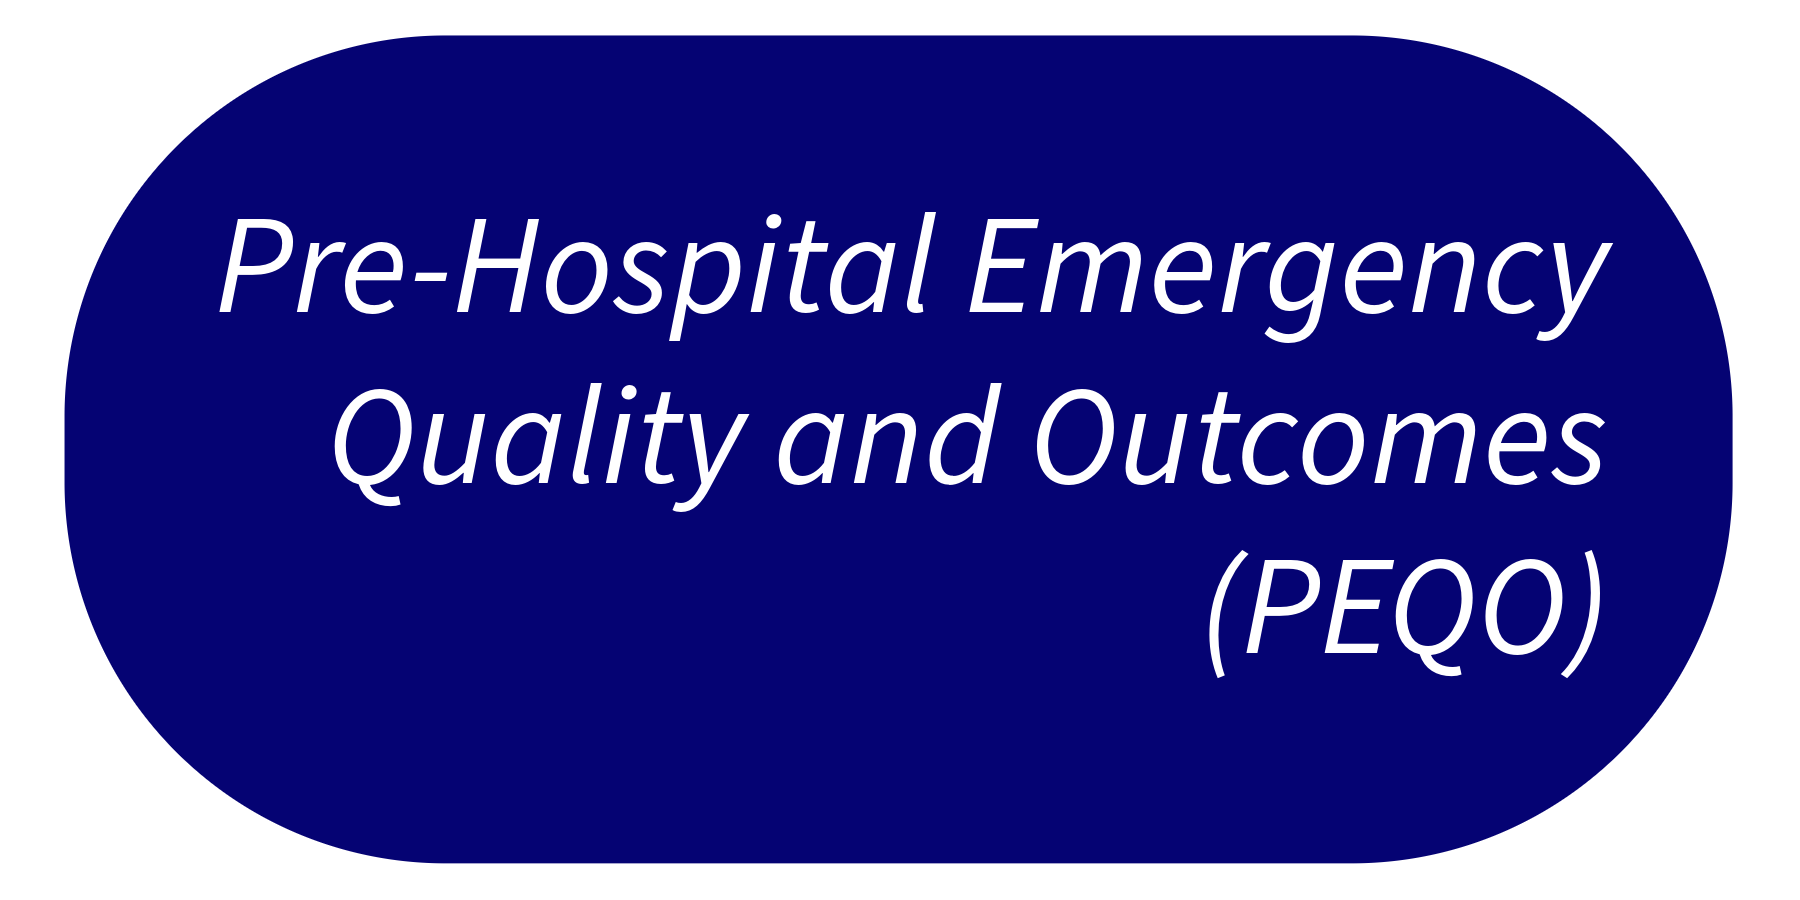 Quality and Outcomes in Primary Healthcare (QOPH)